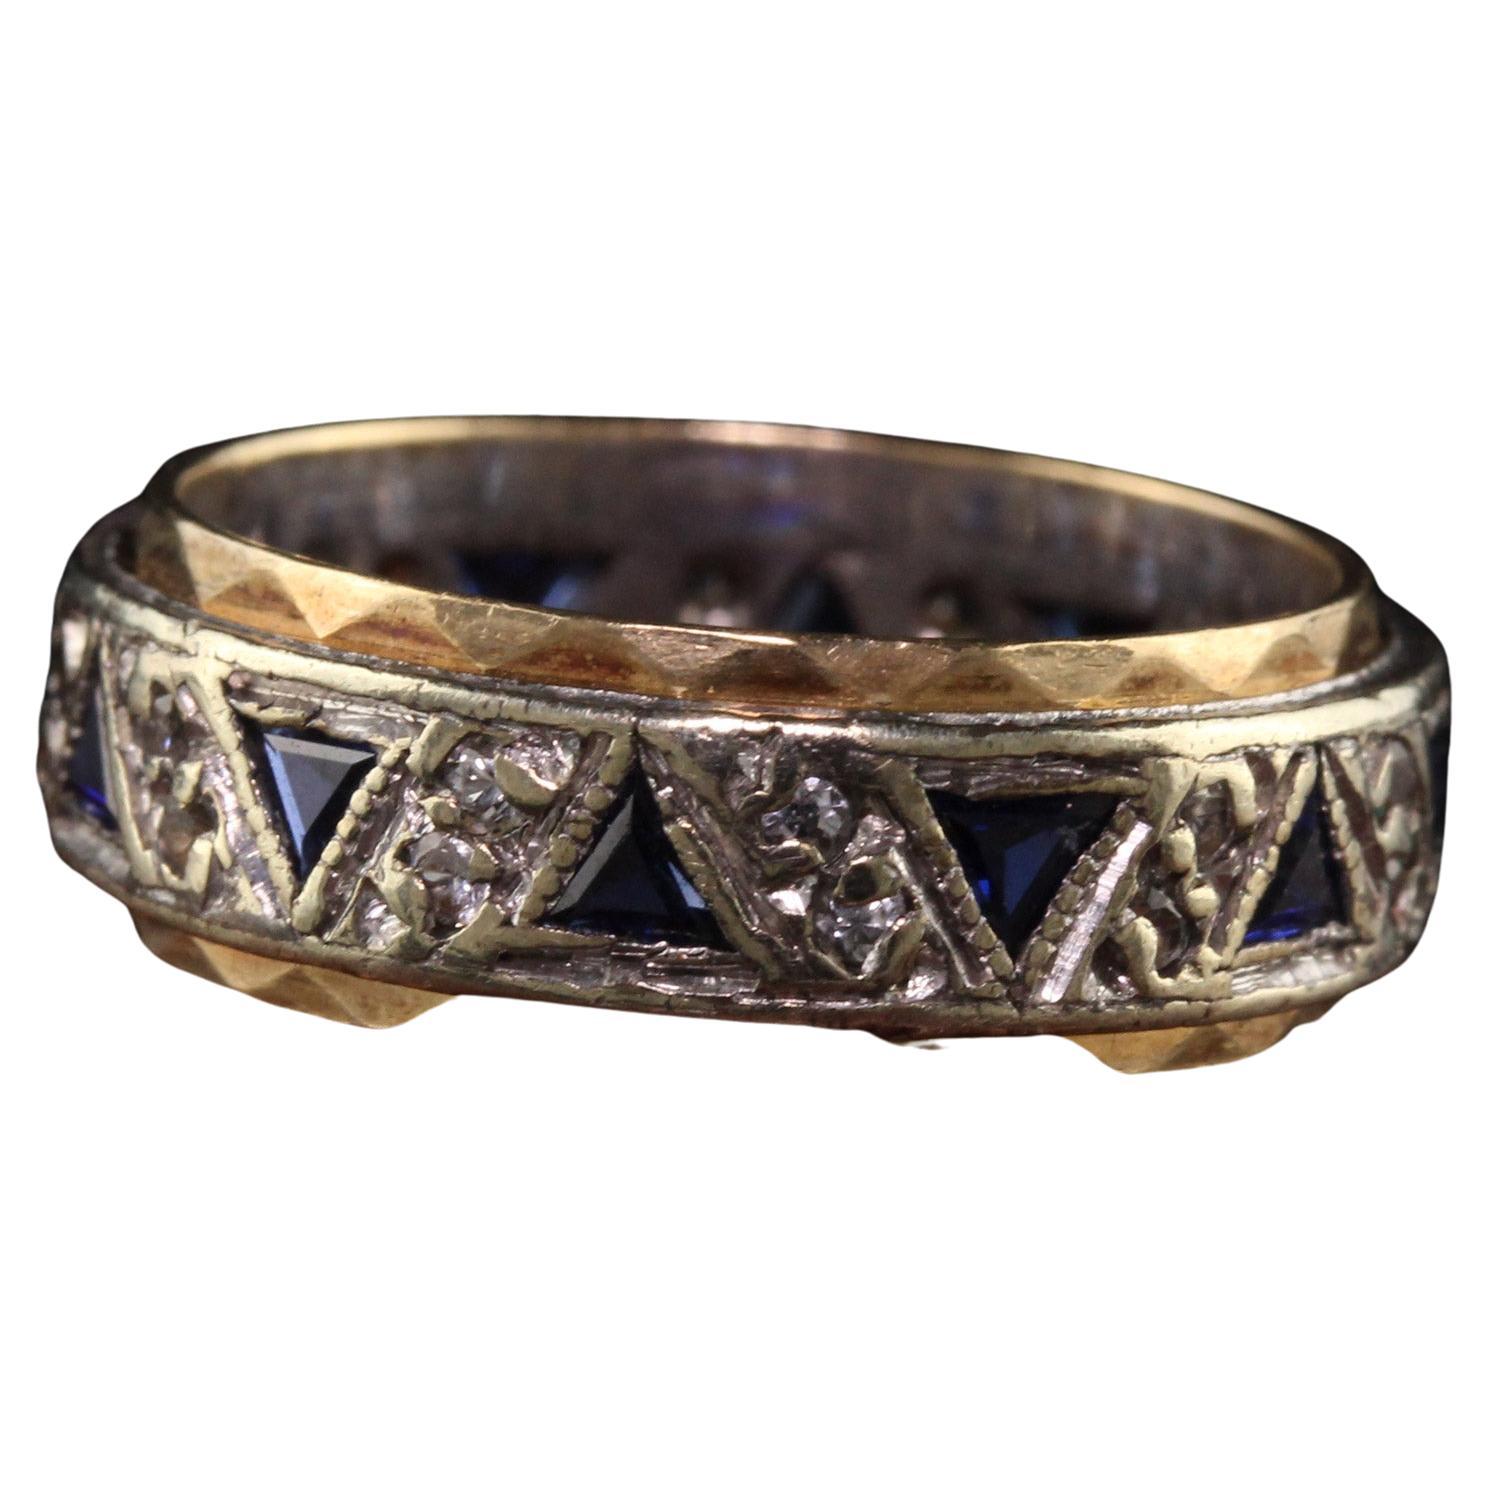 Beautiful Antique Art Deco English 9K Yellow and White Gold Sapphire Diamond Band. This incredible band is crafted in 9k white and yellow gold. The band has triangle cut sapphires and single cut diamonds set all around the entire band. The inside is